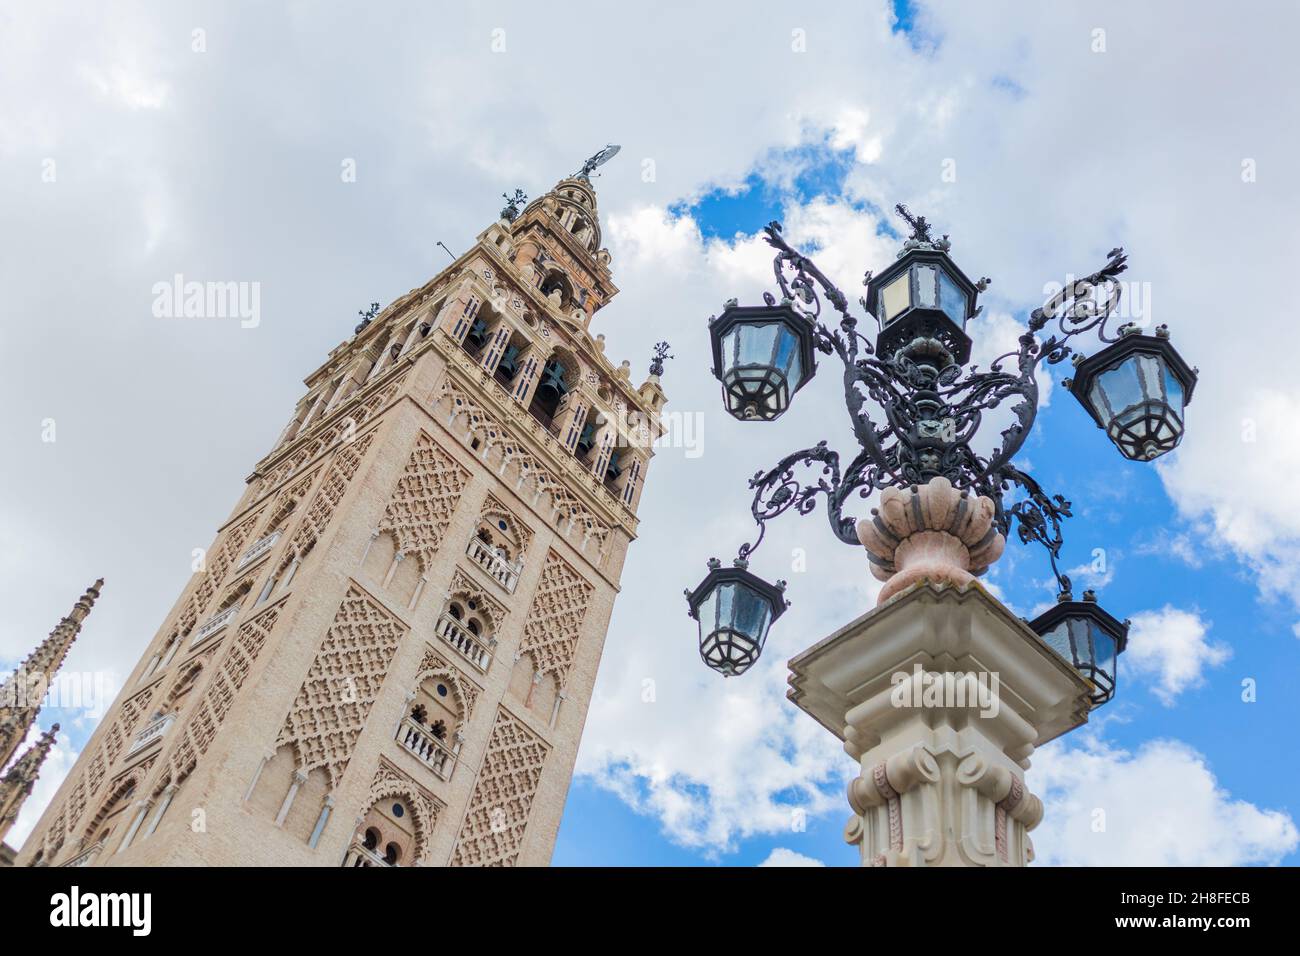 Close up of La Giralda, the bell tower of the Seville Cathedral in Spain. Stock Photo